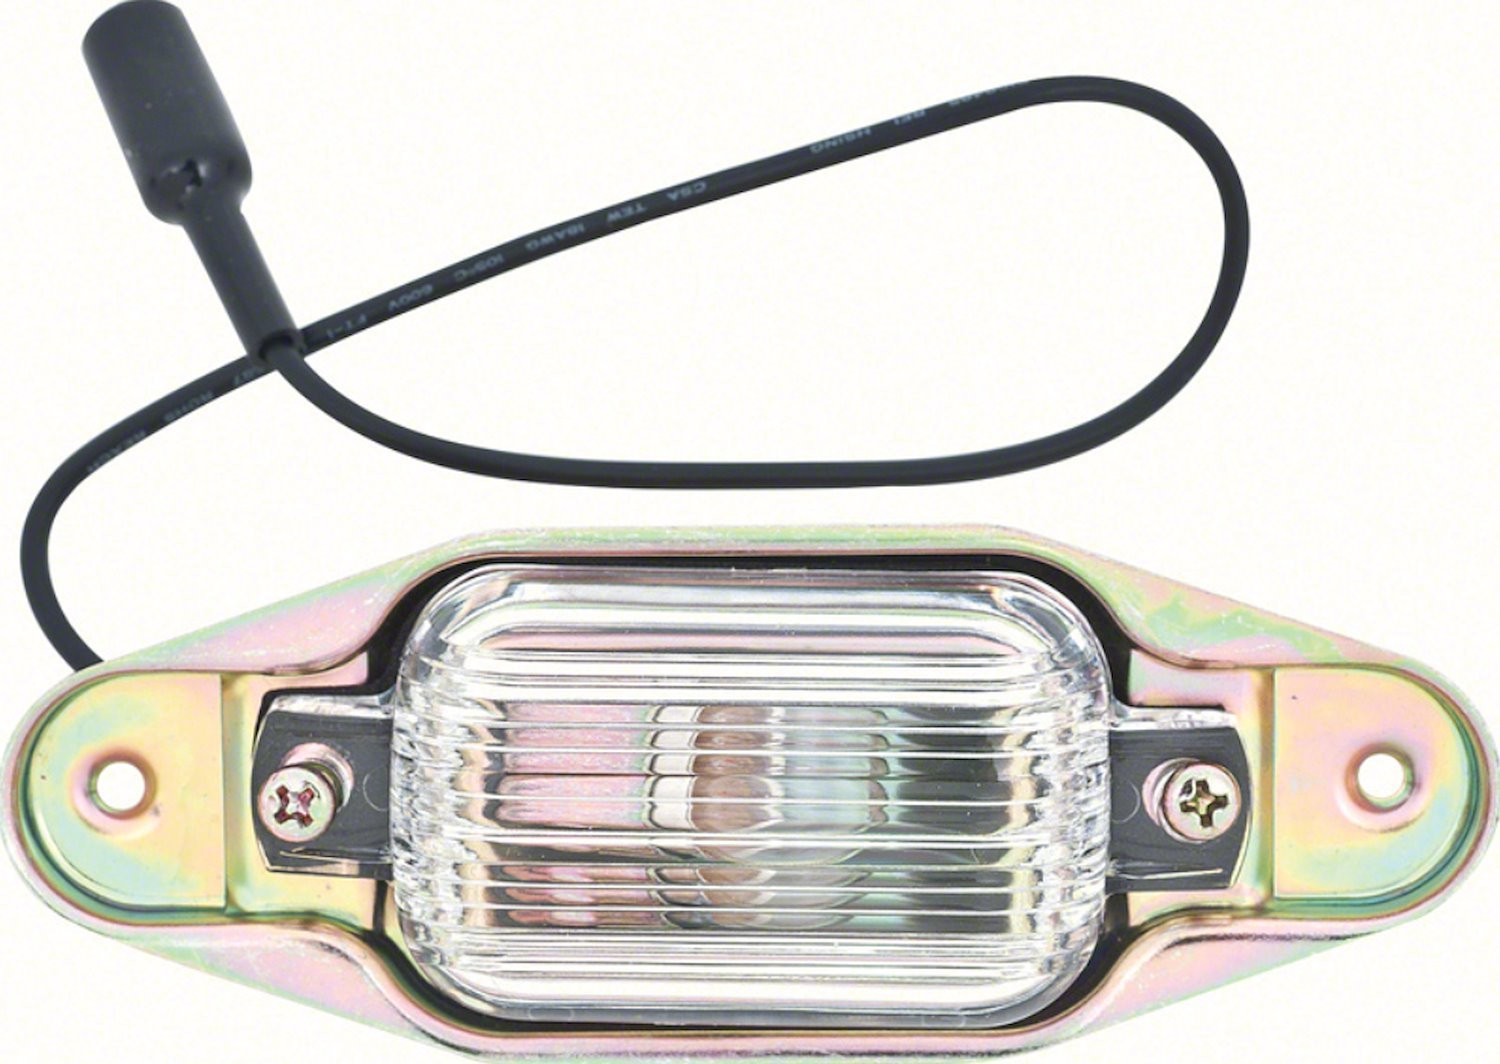 917069 Rear License Plate Lamp Assembly 1967-91 Chevrolet/GMC Truck, Blazer, Jimmy, Suburban; With Socket